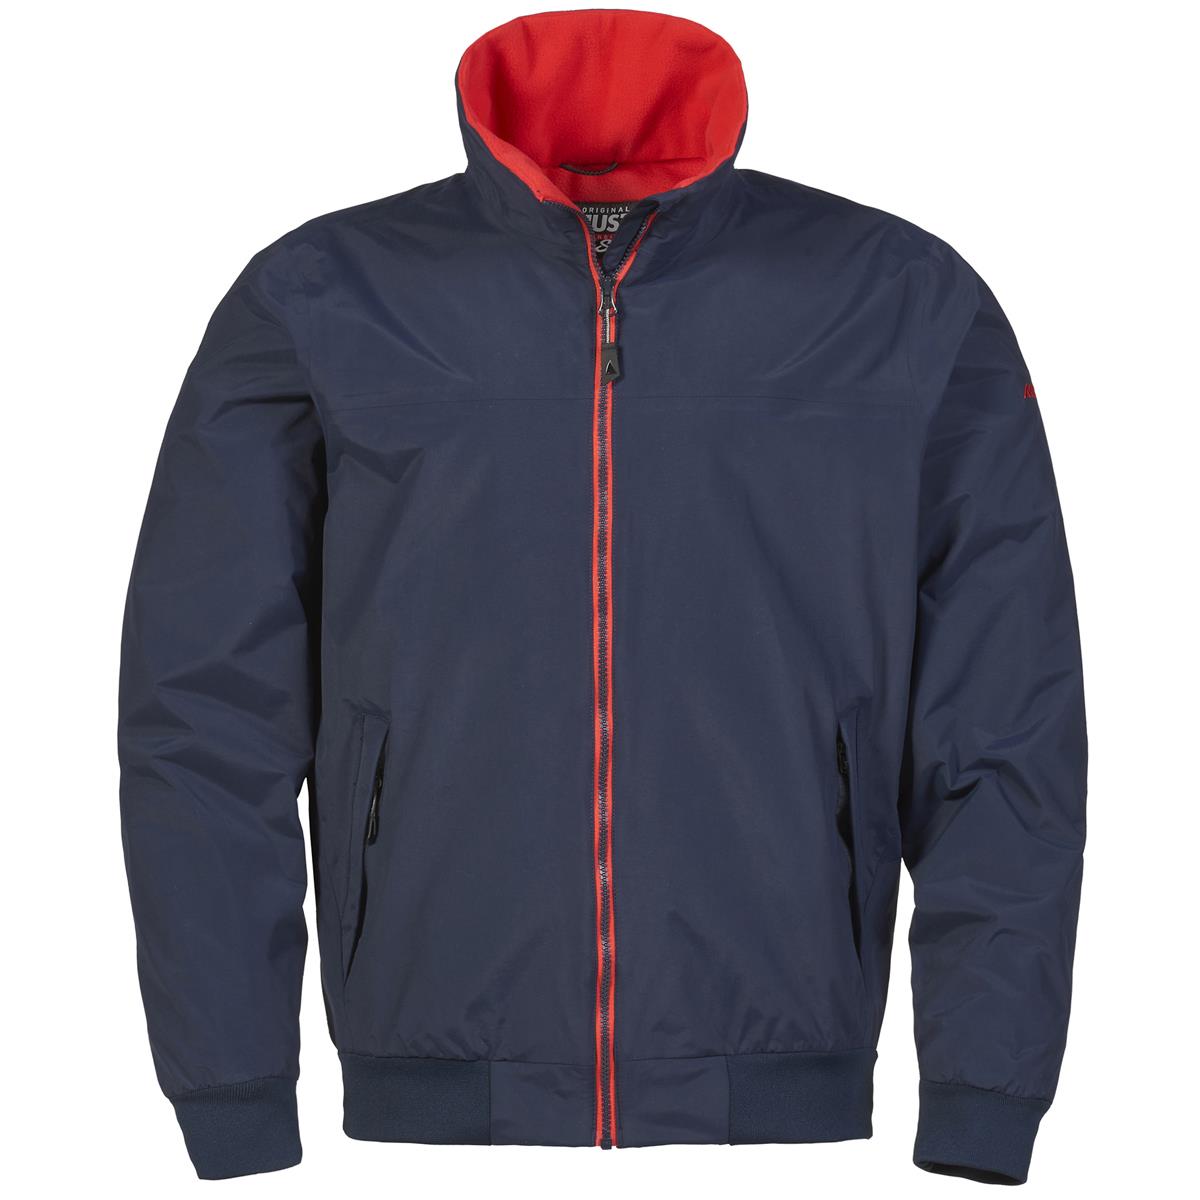 What enhancements have been made to the Musto Snug Jacket?